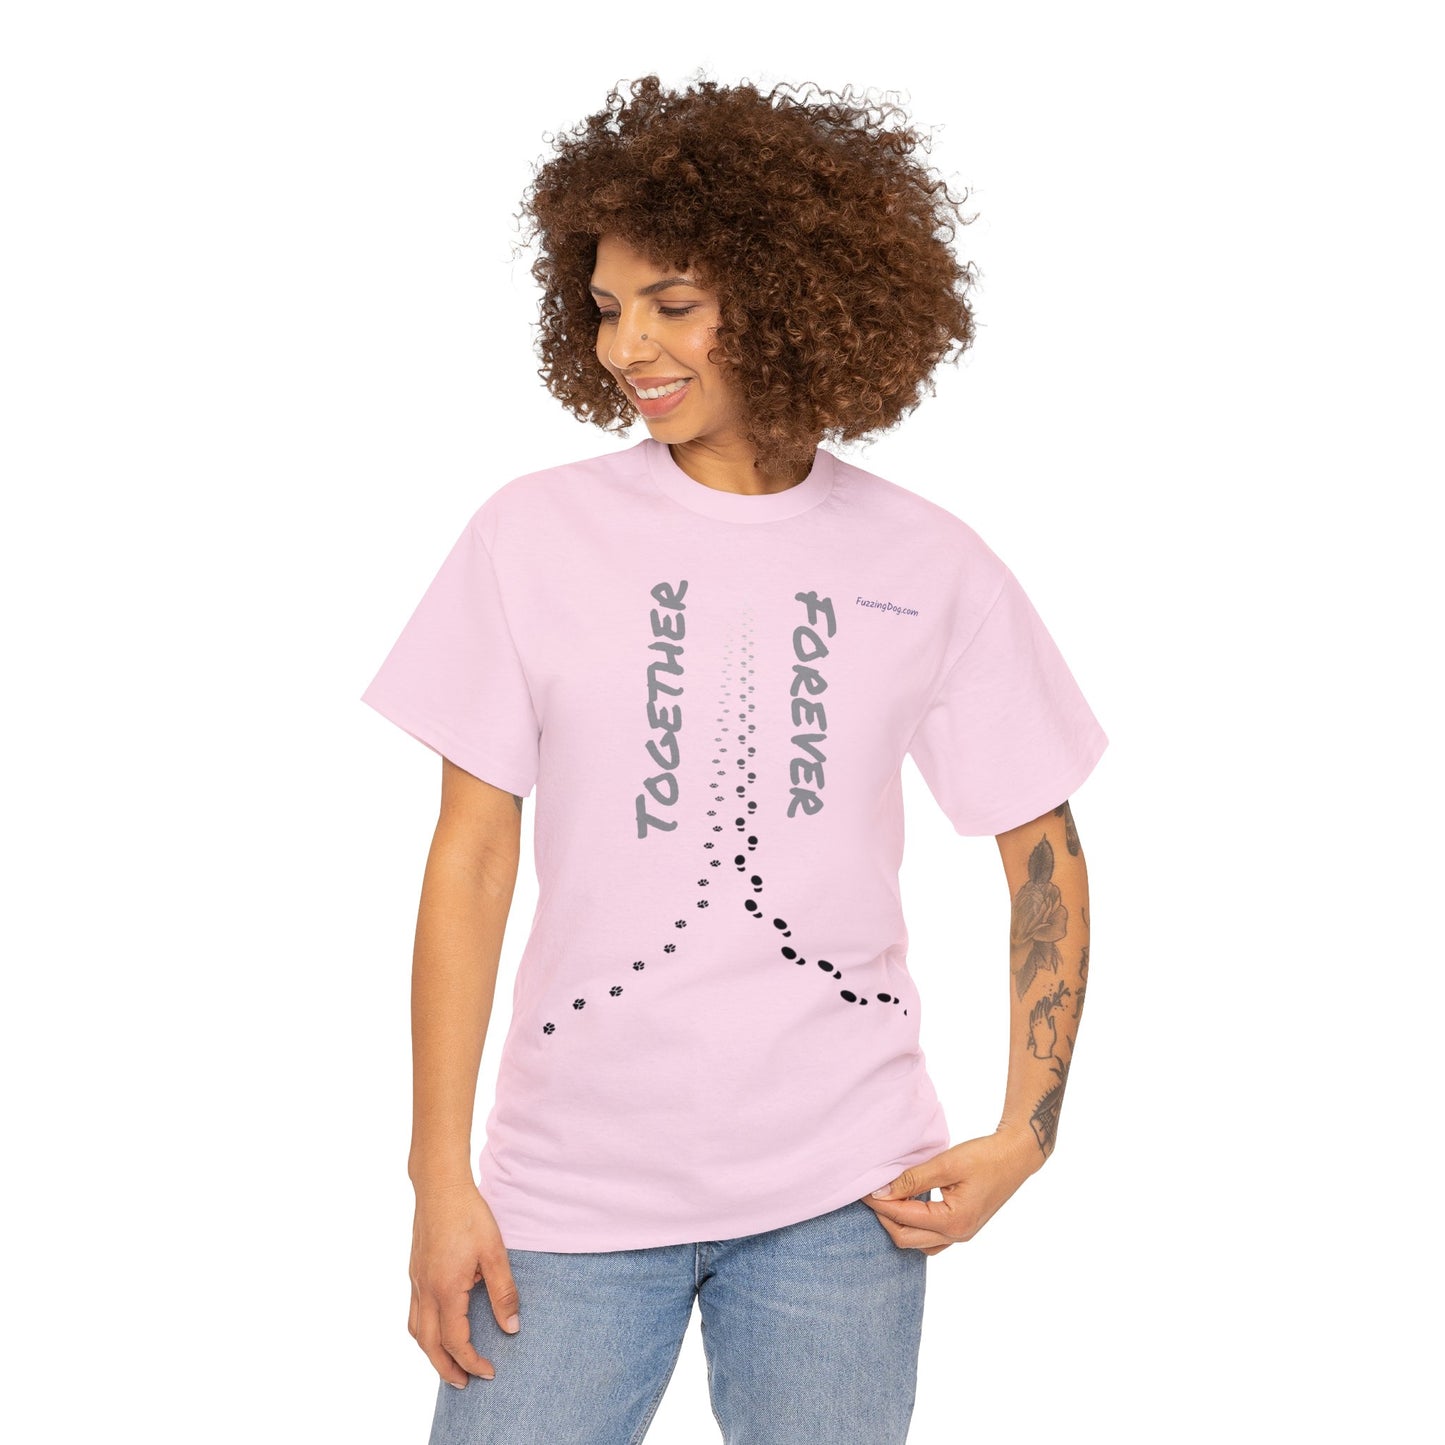 Together Forever Unisex Heavy Cotton Tee